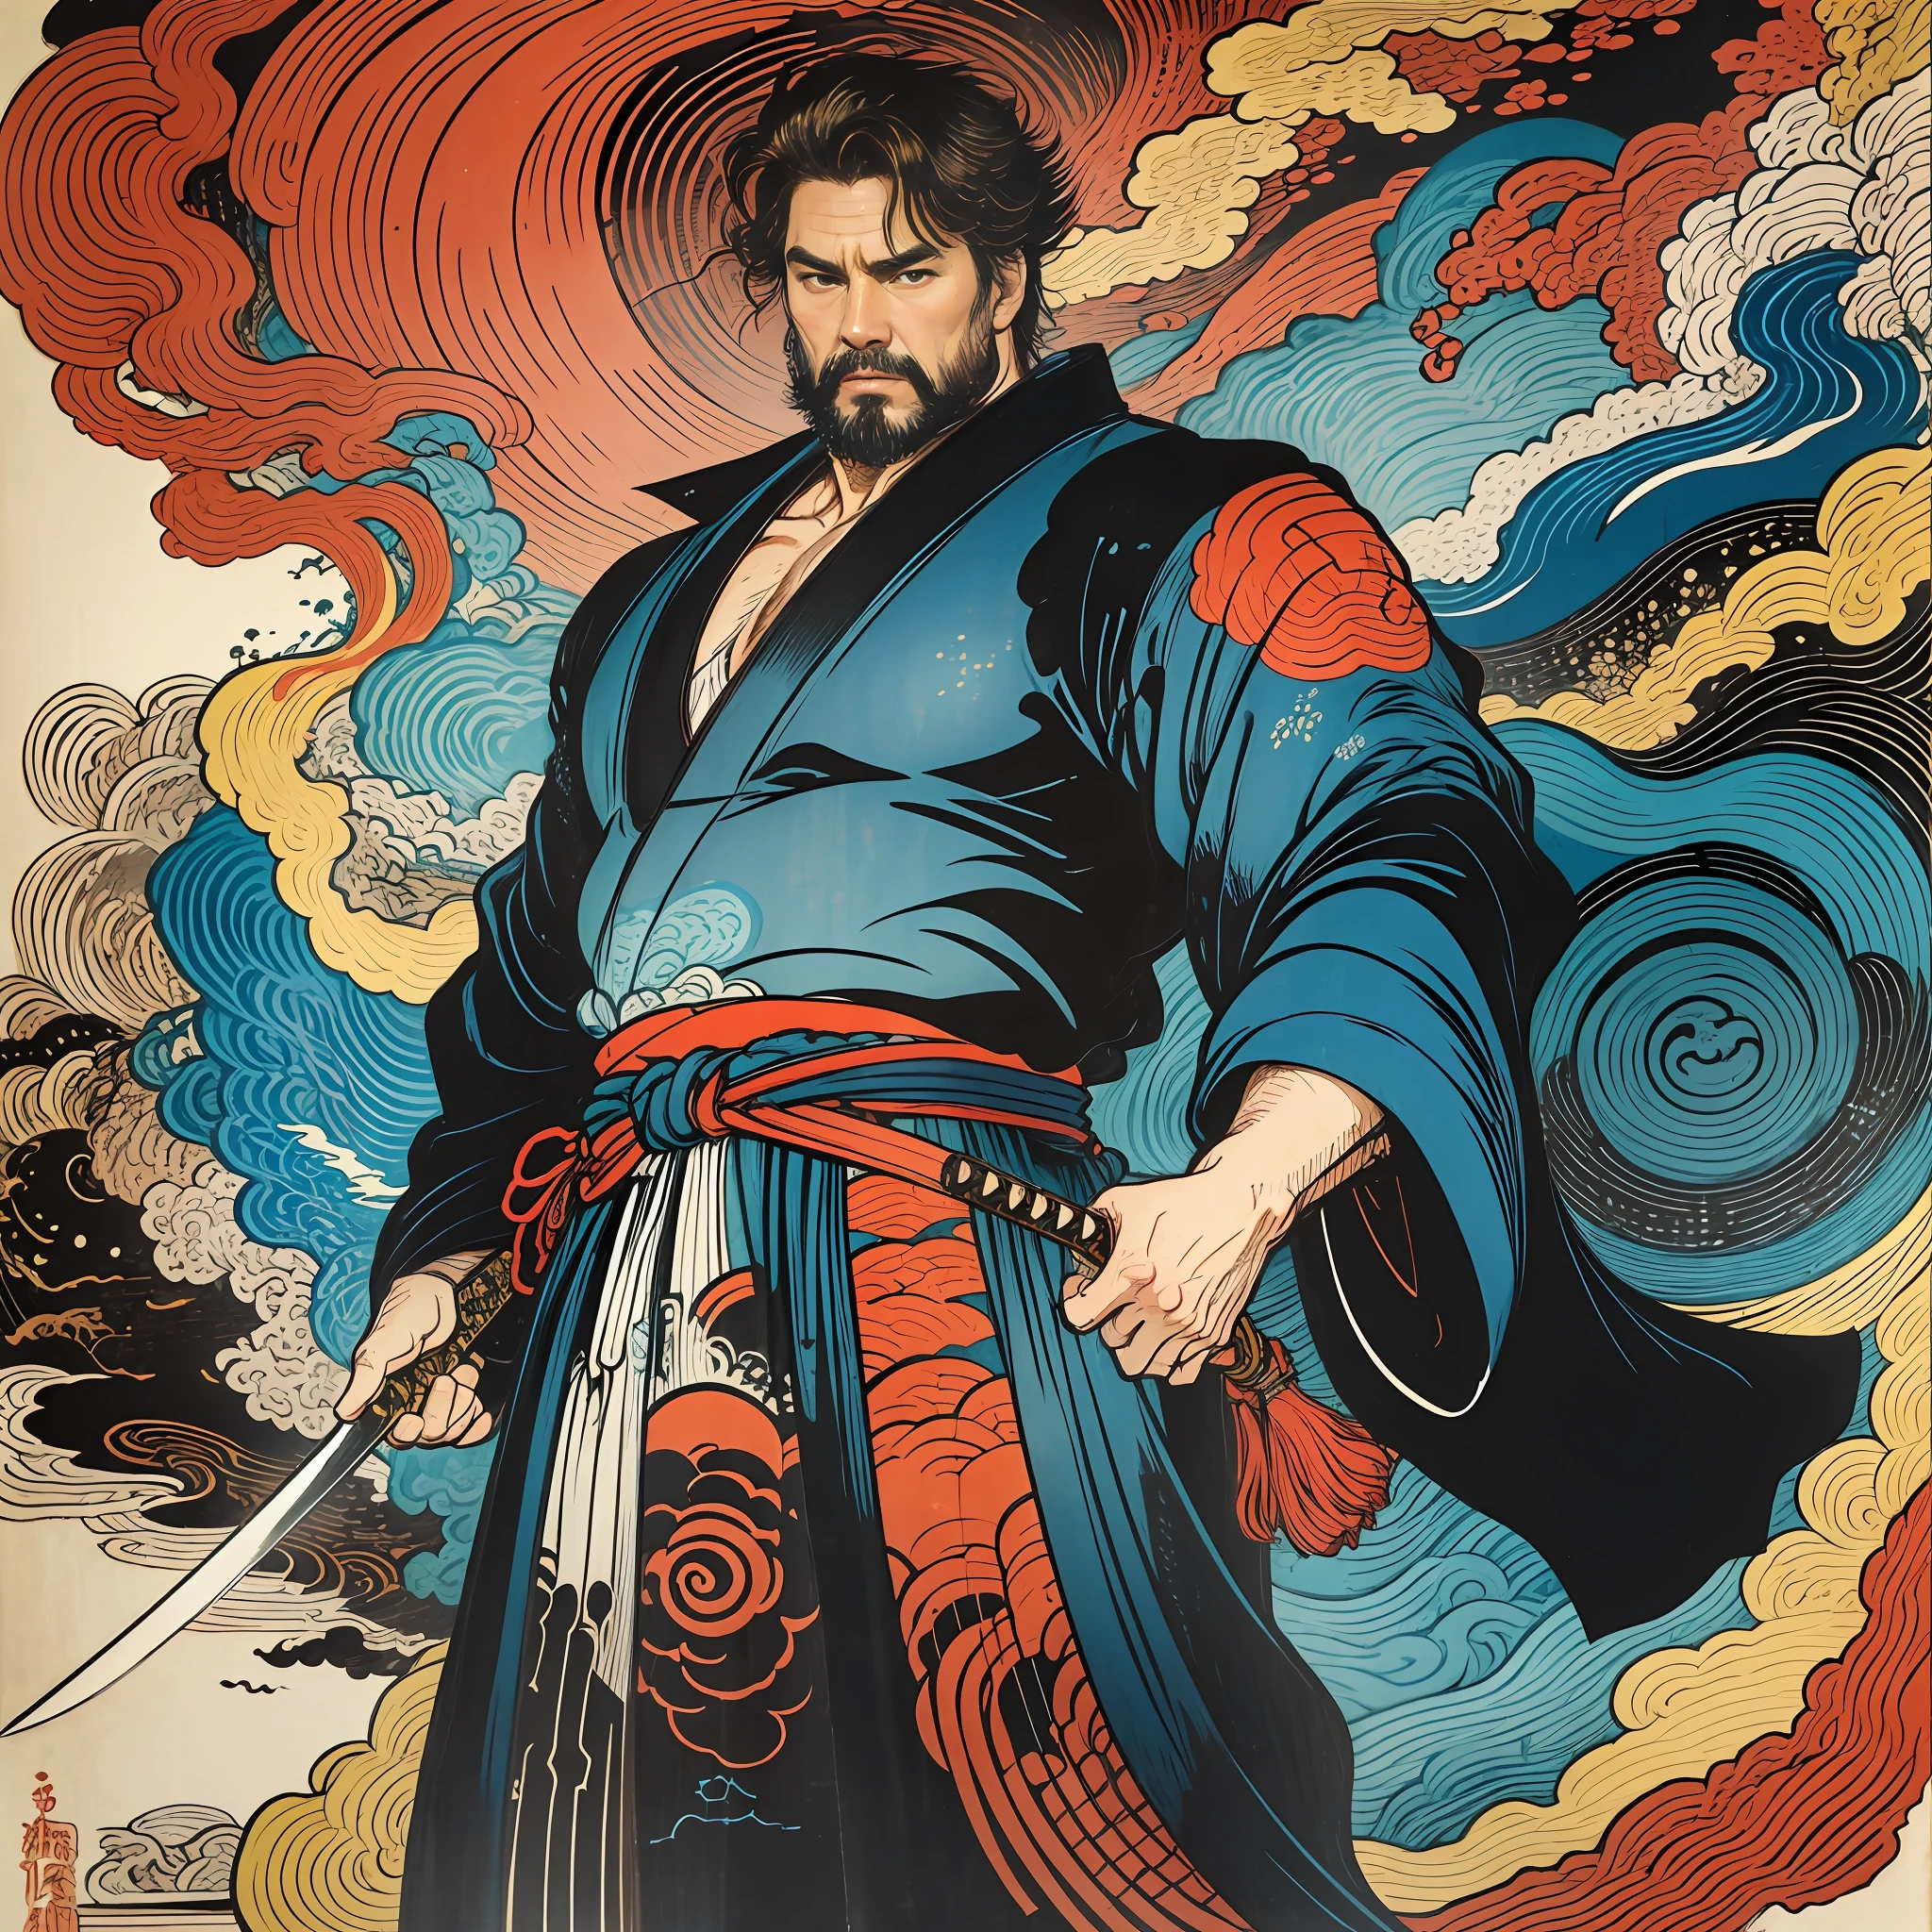 It is a full-body painting with natural colors with Katsushika Hokusai-style line drawings. The swordsman Tom Cruise has a big body like a strongman. Samurai of Japan. With a dignified but manly expression of determination, he confronts evil spirits. He has black short hair and a short, trimmed beard. His upper body is covered with a jet black kimono with a glossy texture, and his hakama is knee-long. In his right hand he holds a Japan sword with a longer sword part. In the highest quality, masterpiece high resolution ukiyo-e style lightning and swirling flames. Among them, Tom Cruise is standing with his back straight, facing the front.